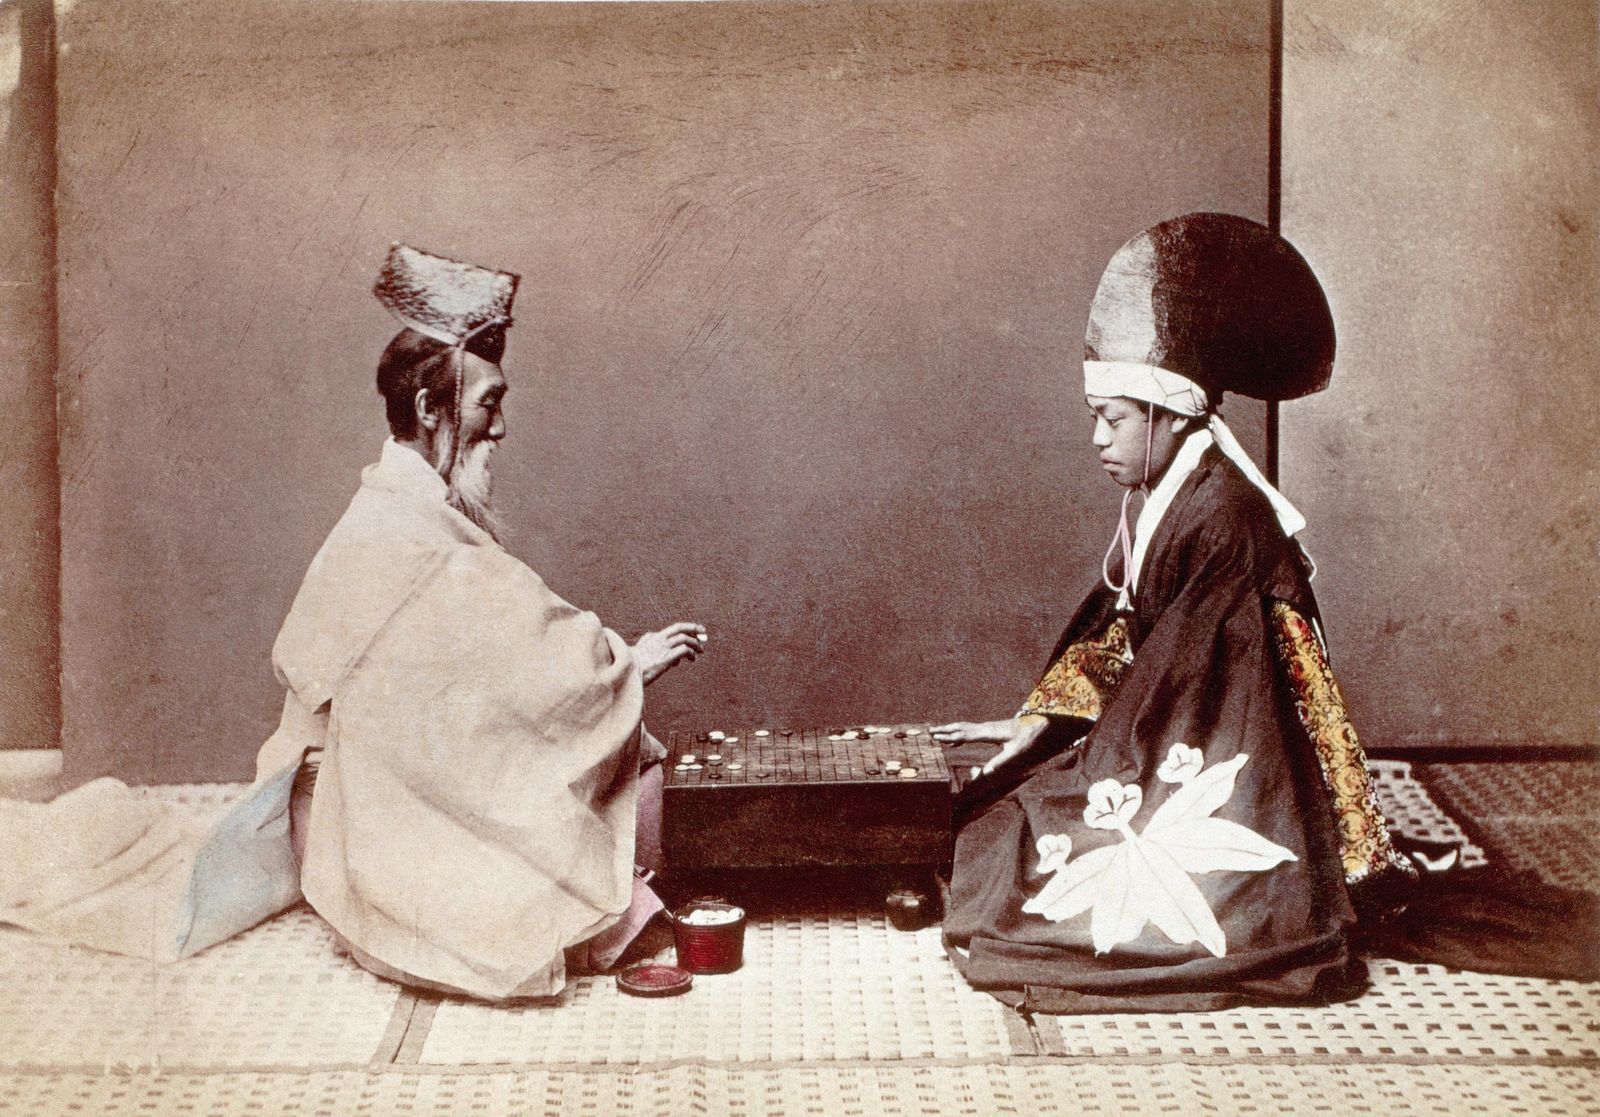 Capturing a Nation: Exploring 19th Century Japanese Photography